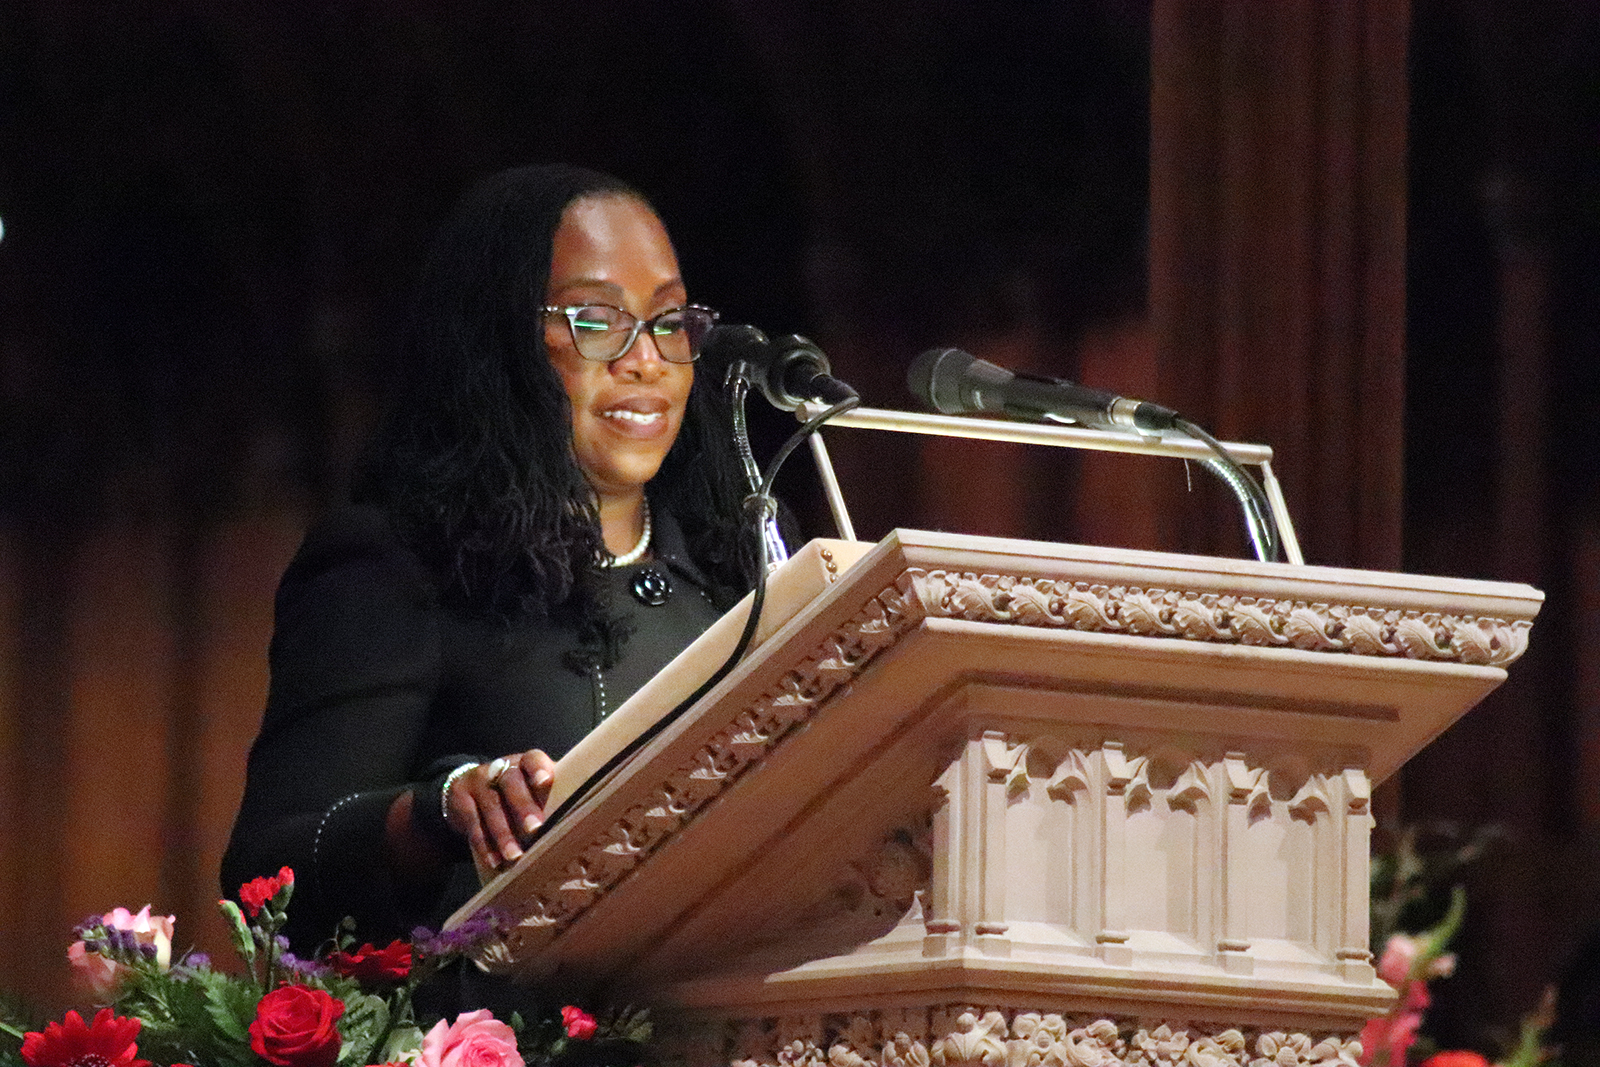 Supreme Court Associate Justice Ketanji Brown Jackson addresses an unveiling and dedication ceremony at the Washington National Cathedral for new stained-glass windows, Saturday, Sept. 23, 2023. RNS photo by Adelle M. Banks